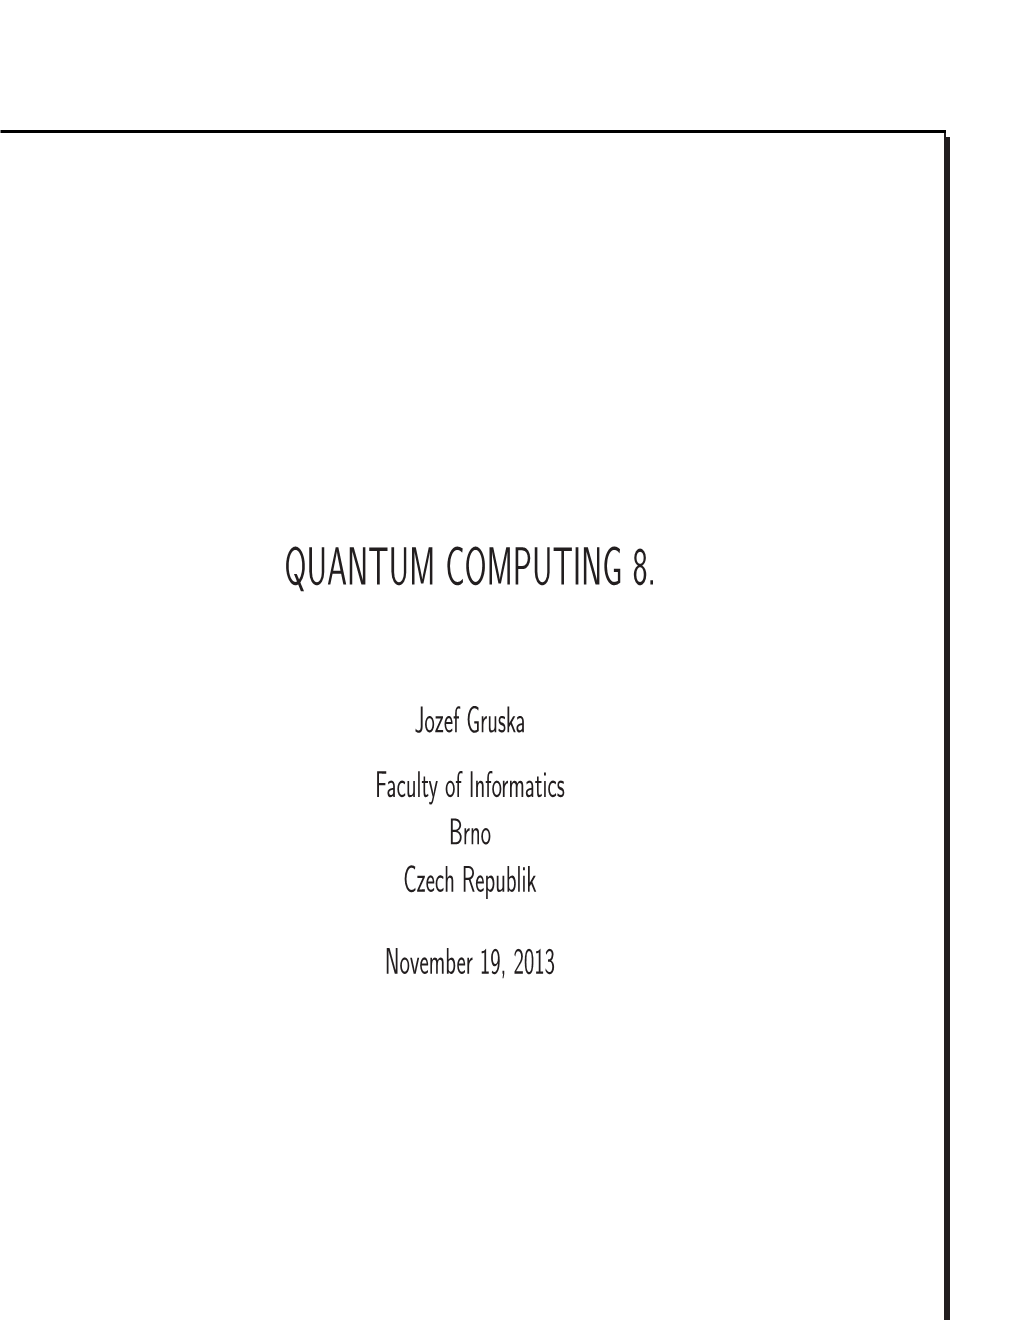 Quantum Automata Are Used: to Get an Insight Into the Power of Diﬀerent Quantum Computing Models and • Modes, Using Language/Automata Theoretic Methods